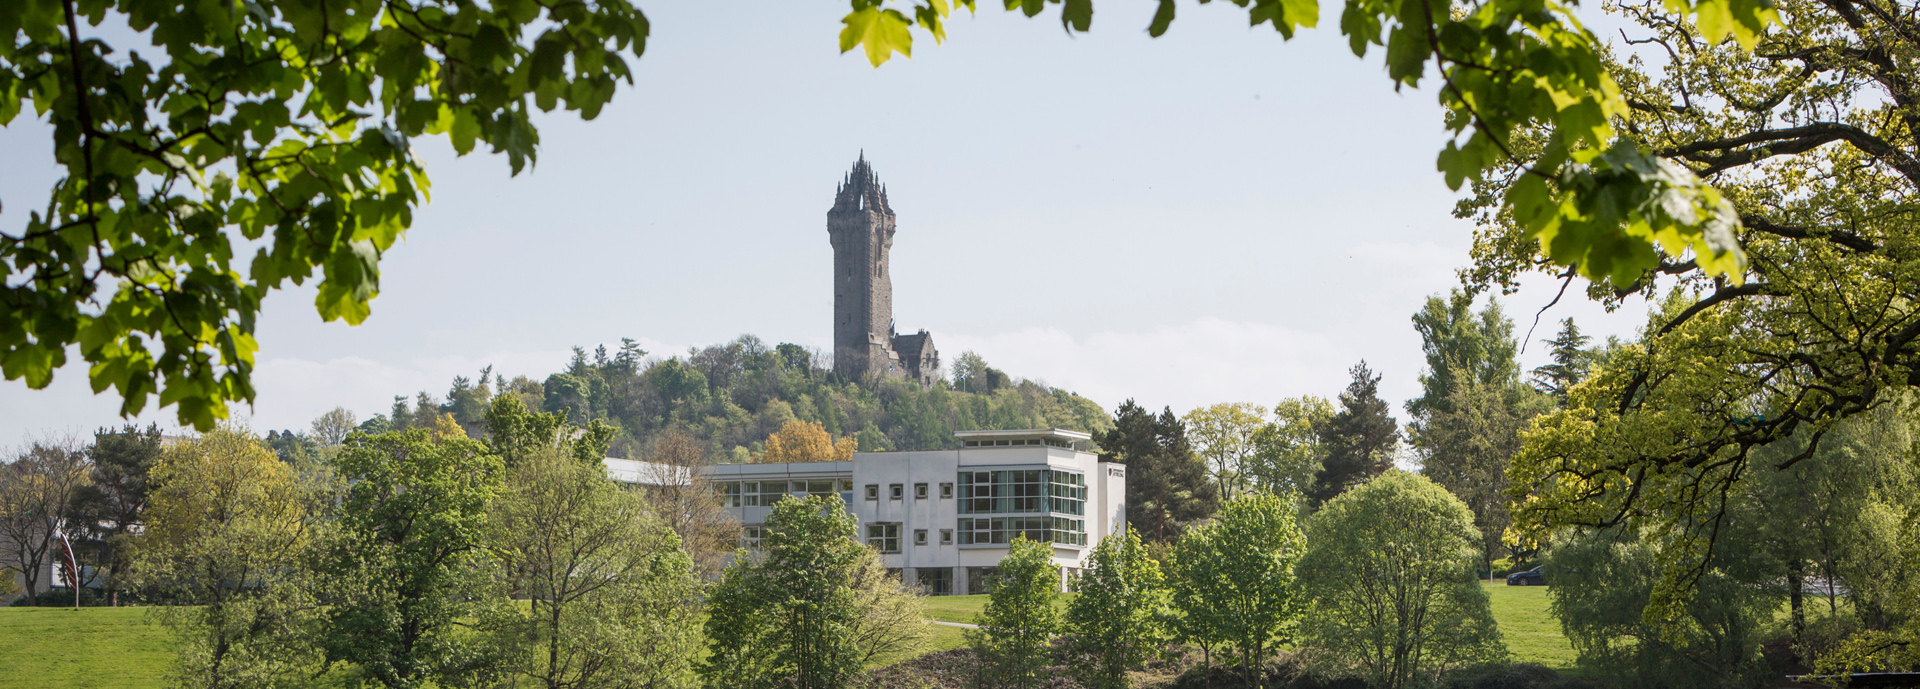 Social work practice in times of disaster free workshop at the University of Stirling